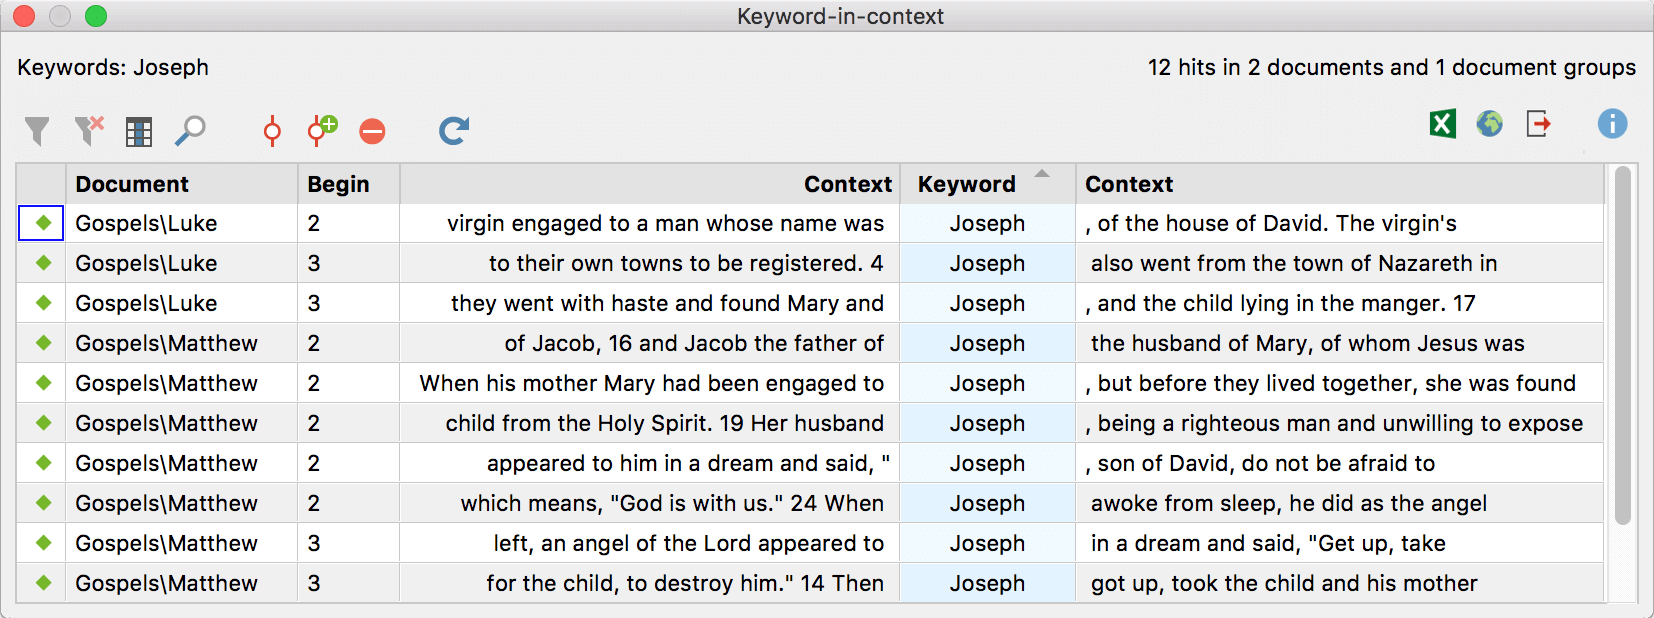 Results table for “Keyword-in-context”